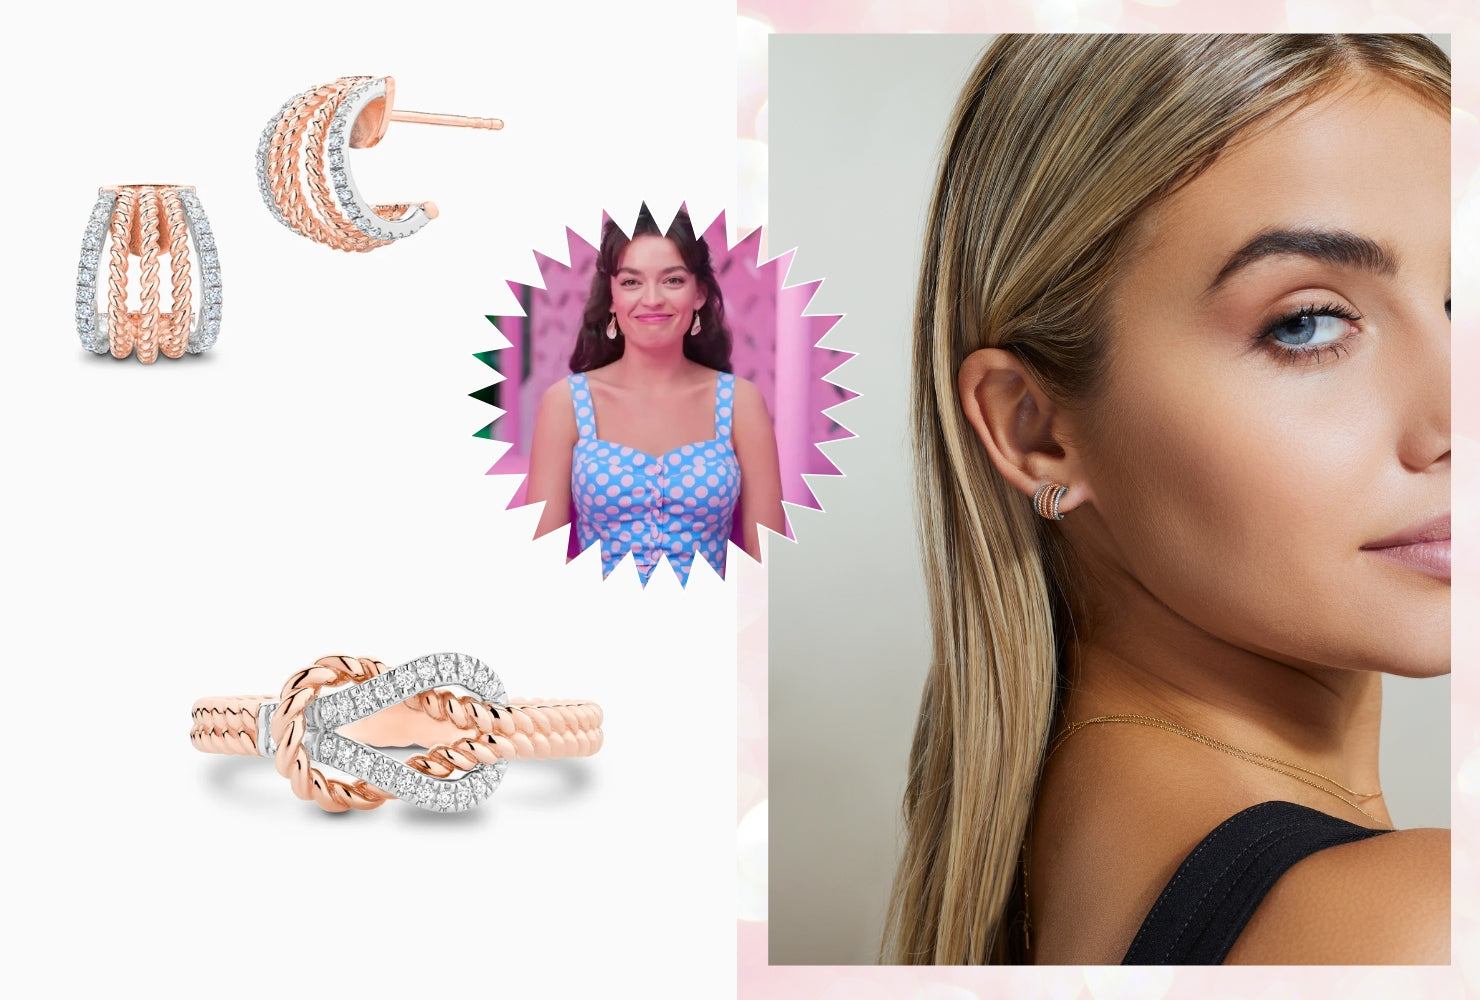 Model wearing jewelry from the Tresses Collection next to an image of Emma Mackey's Barbie